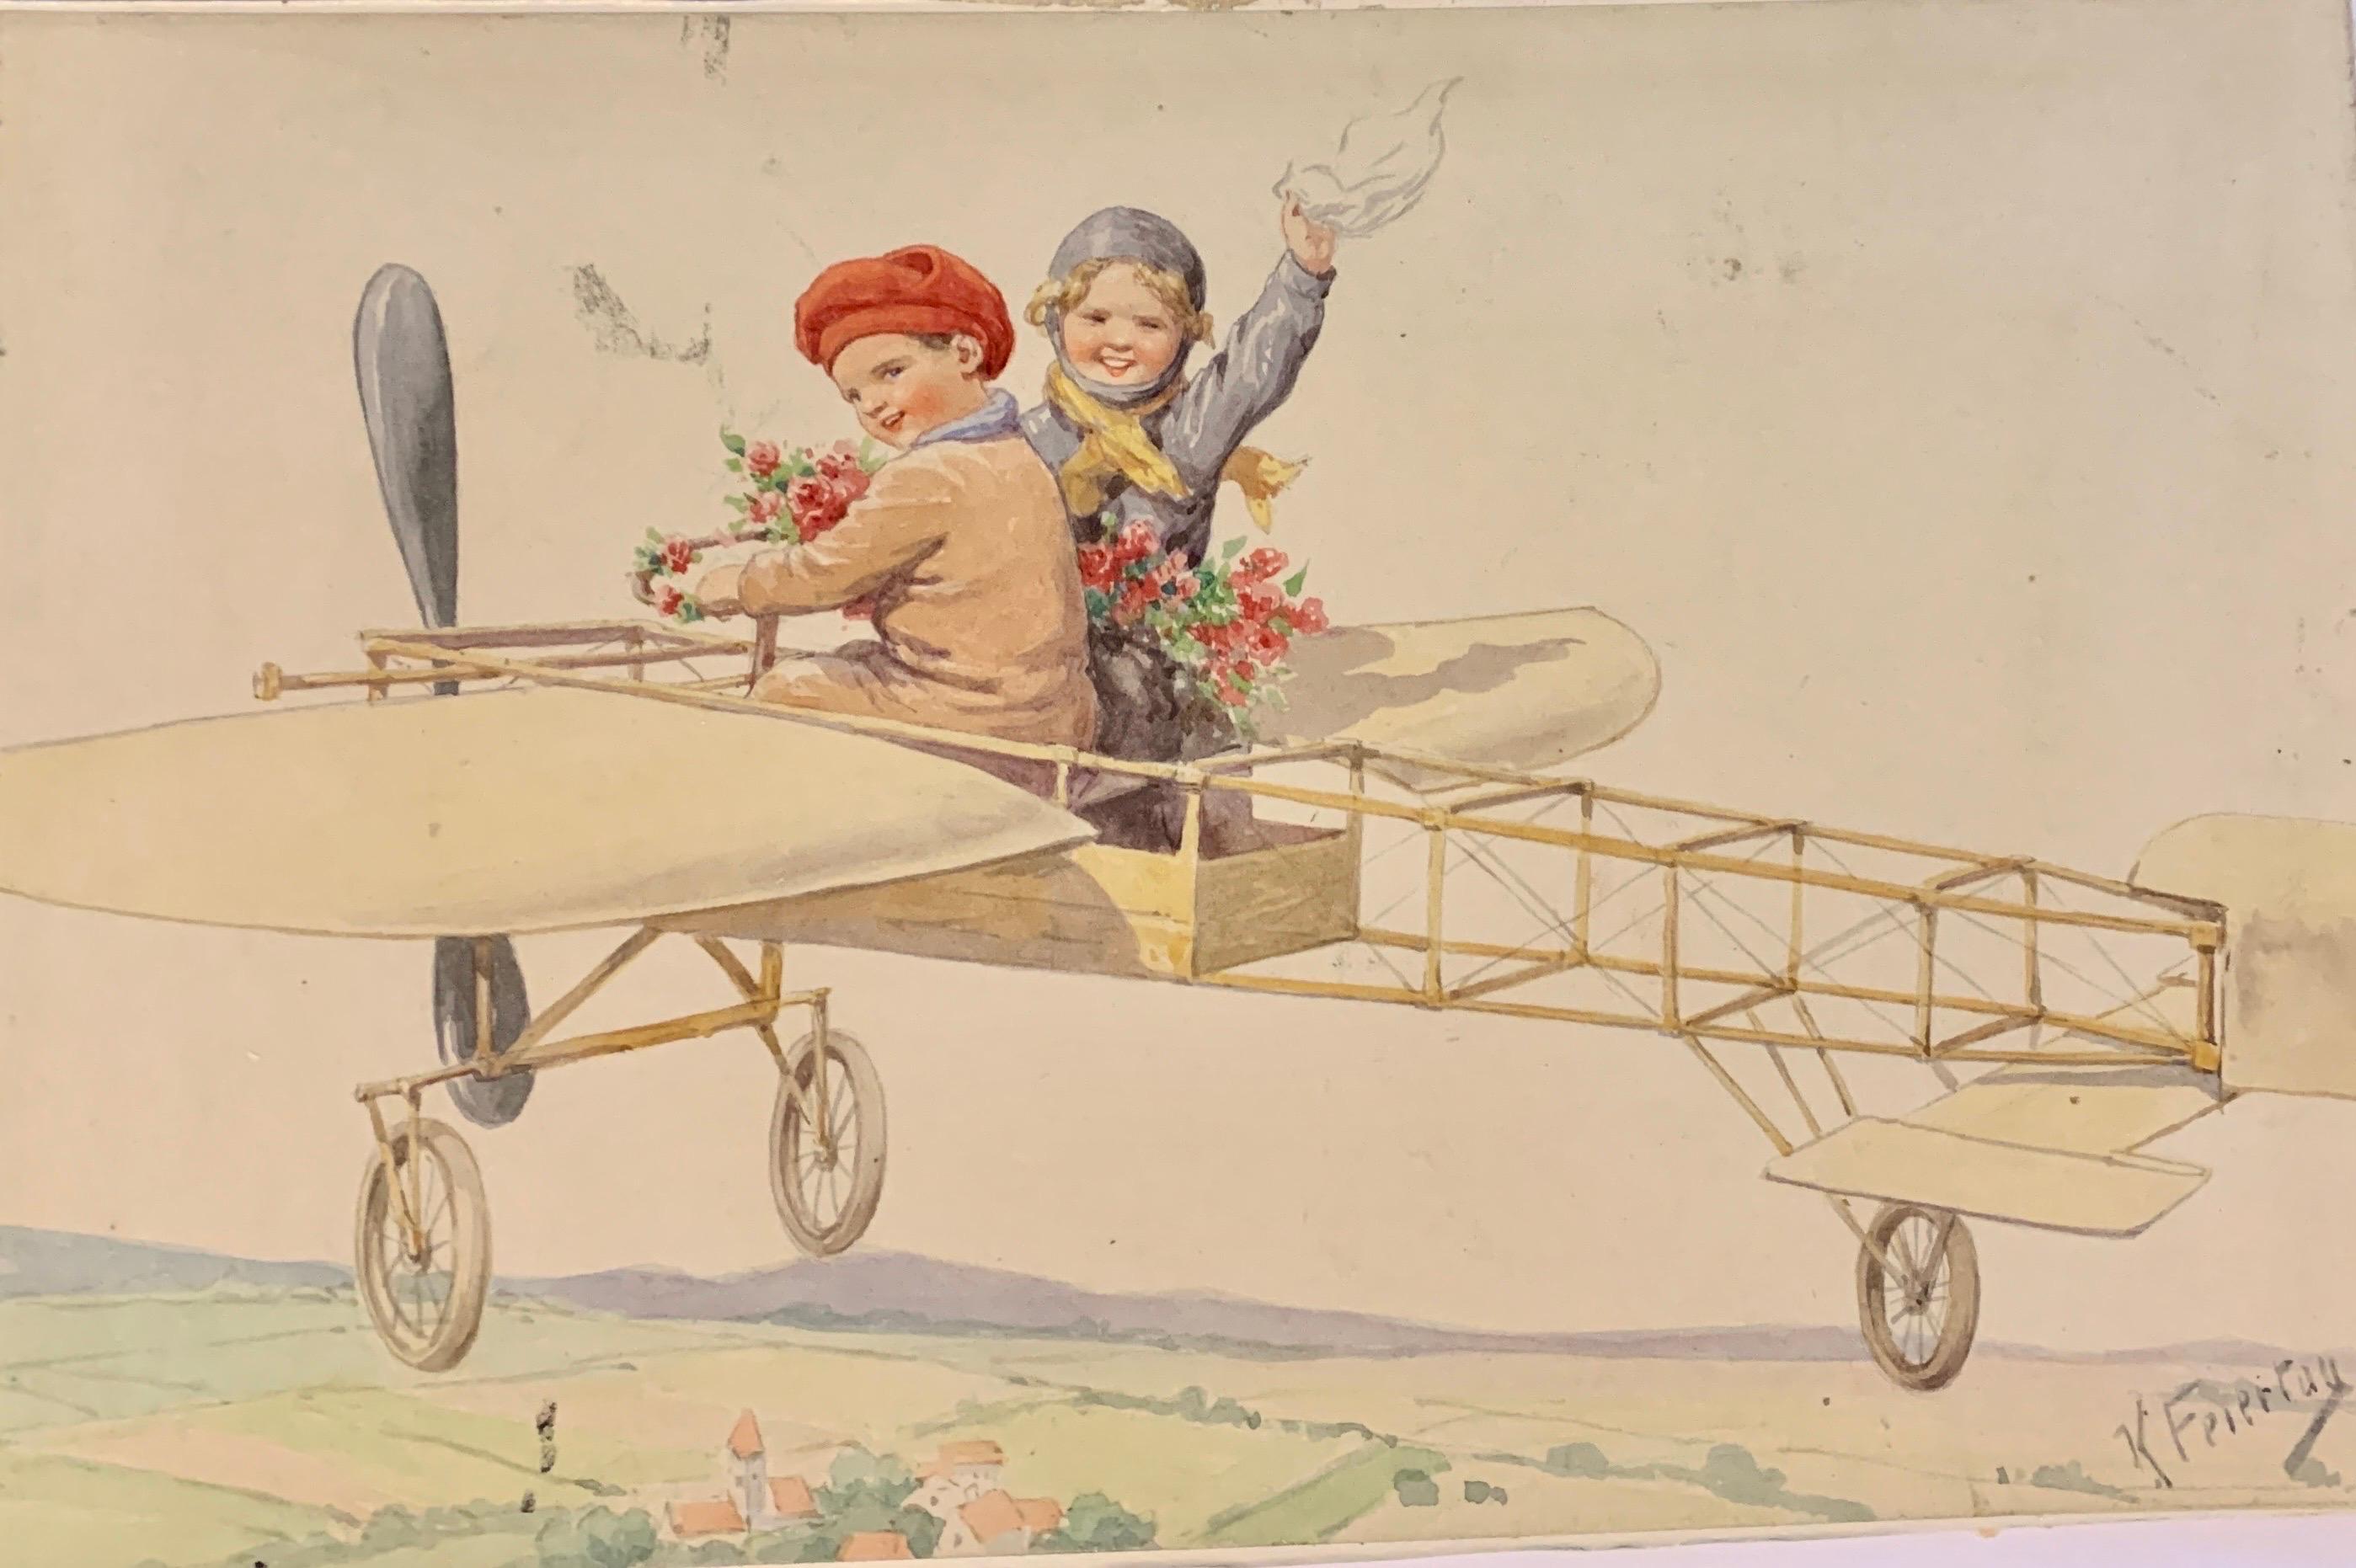 German 19th century watercolor of children flying in a plane over a landscape  - Art by Karl Feiertag